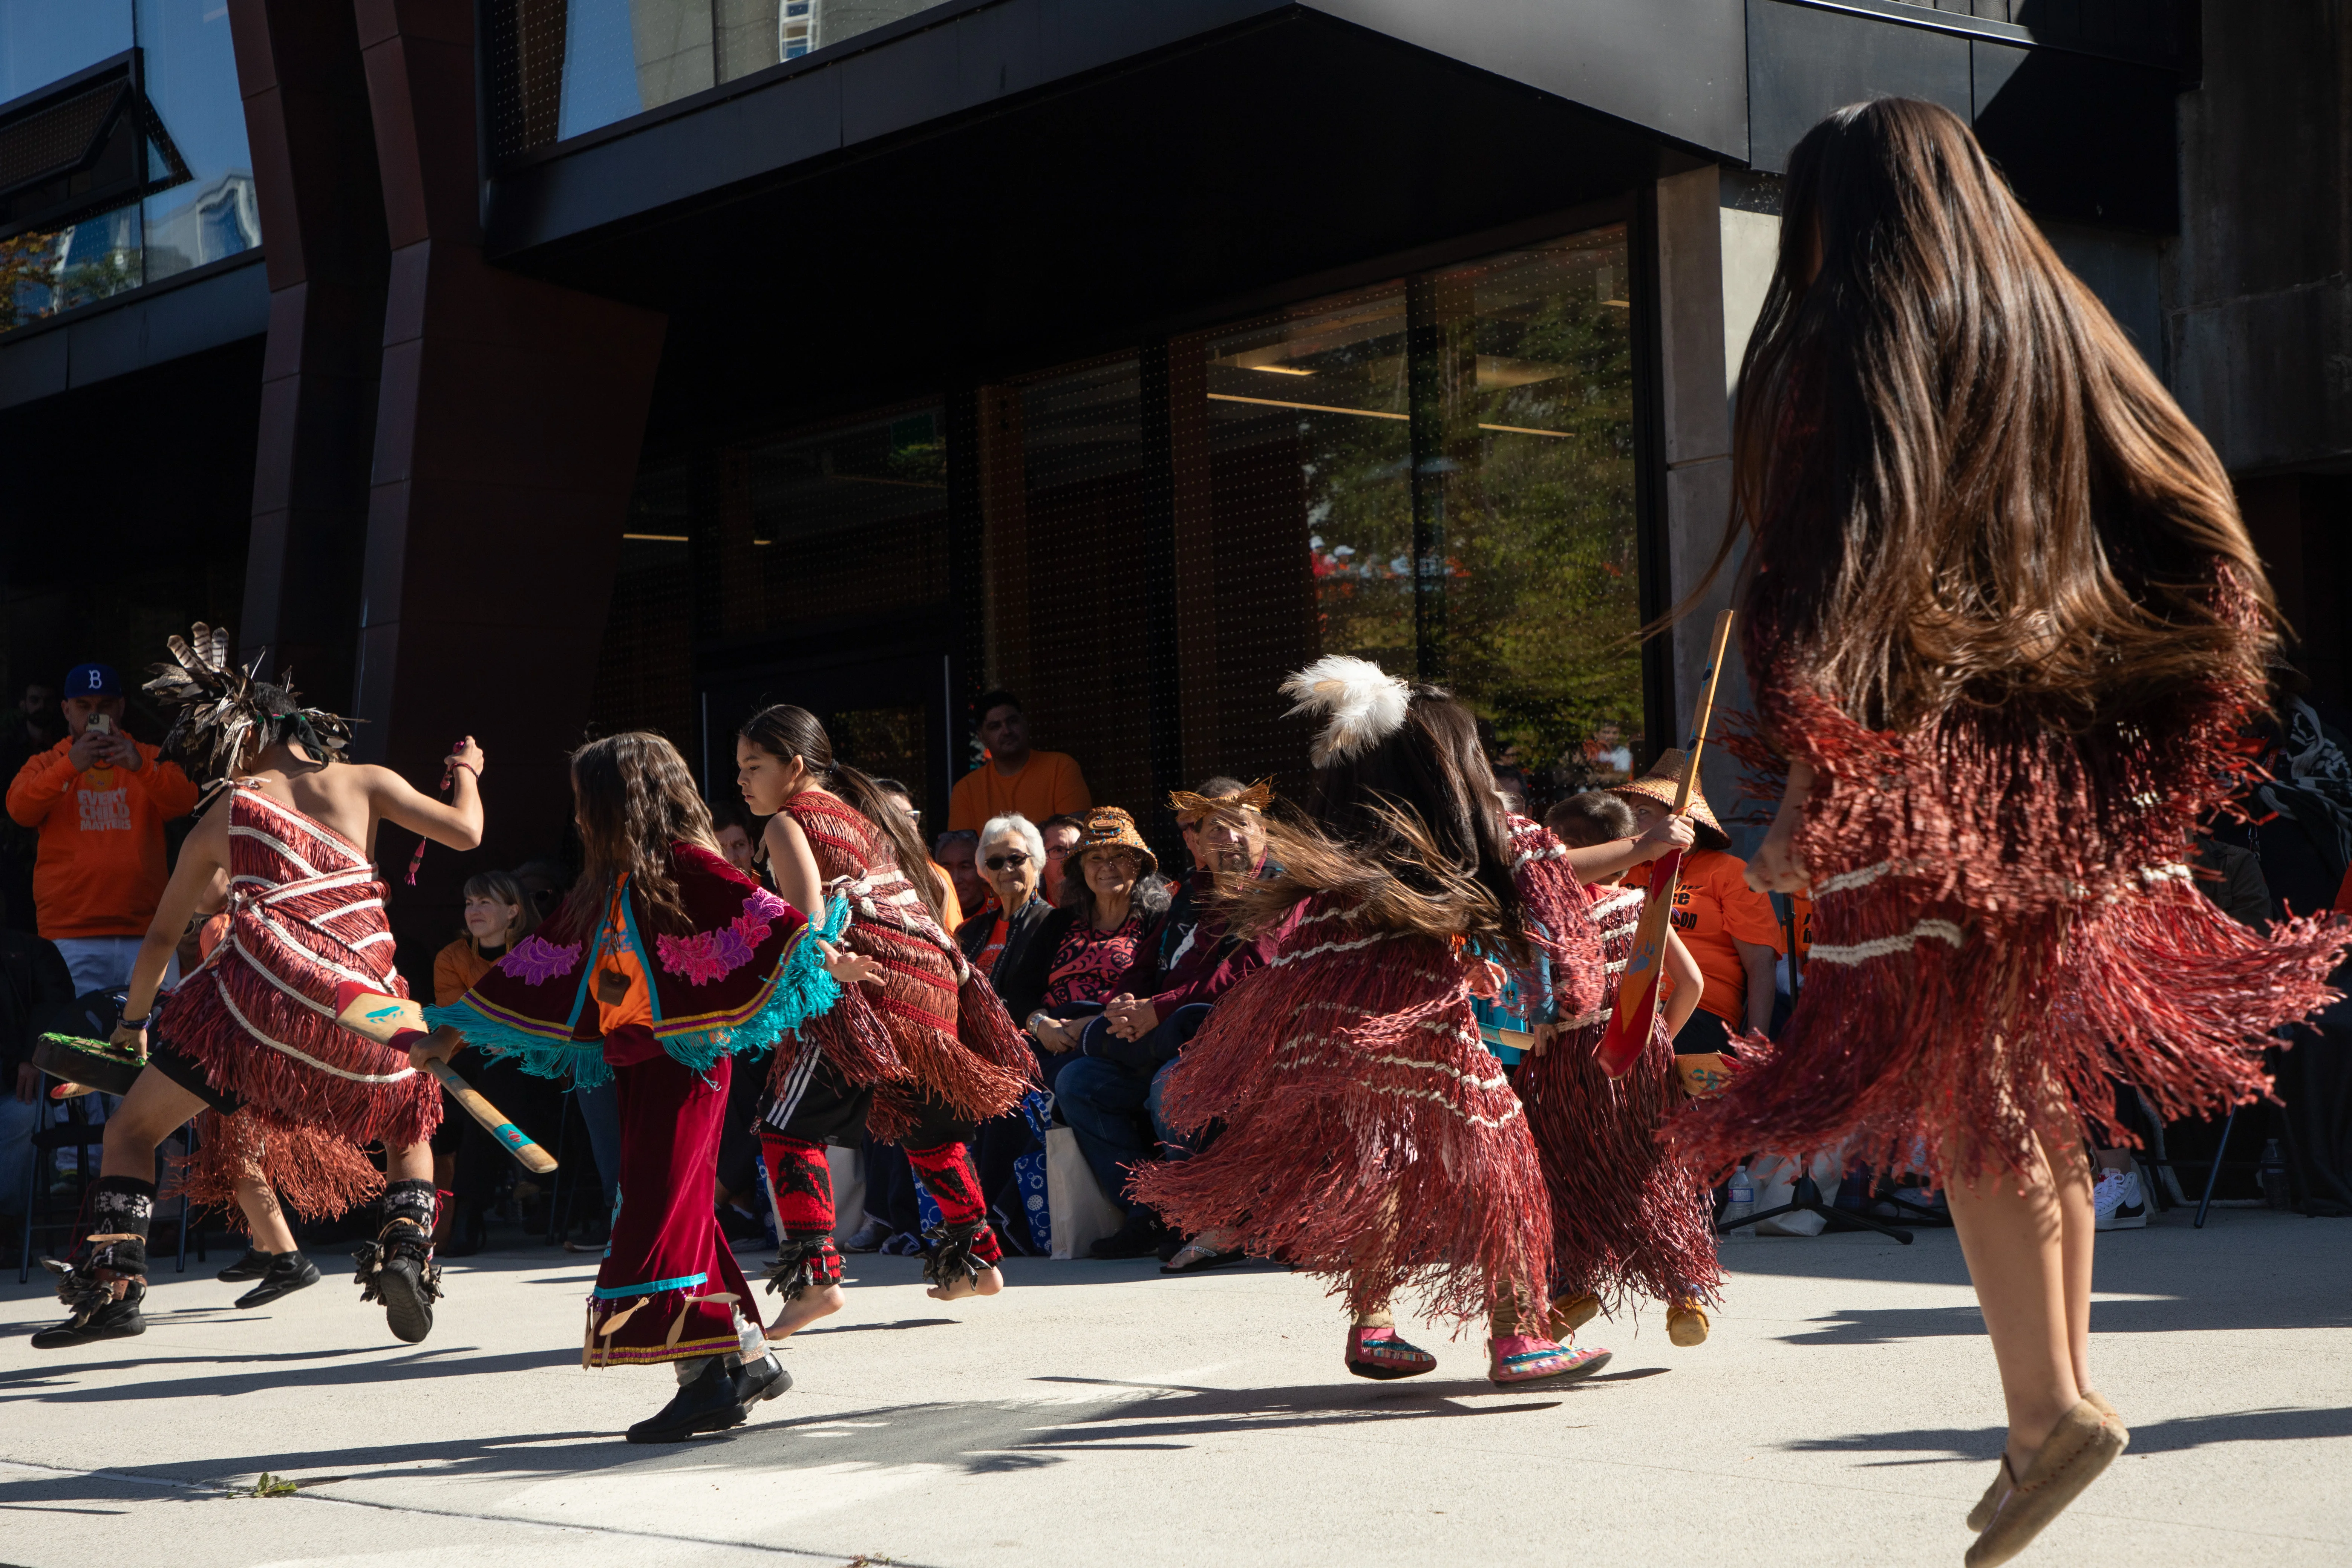 Tsatsu Stalqayu (Coastal Wolfpack), a traditional Coast Salish song and dance group, performs before the marchers.